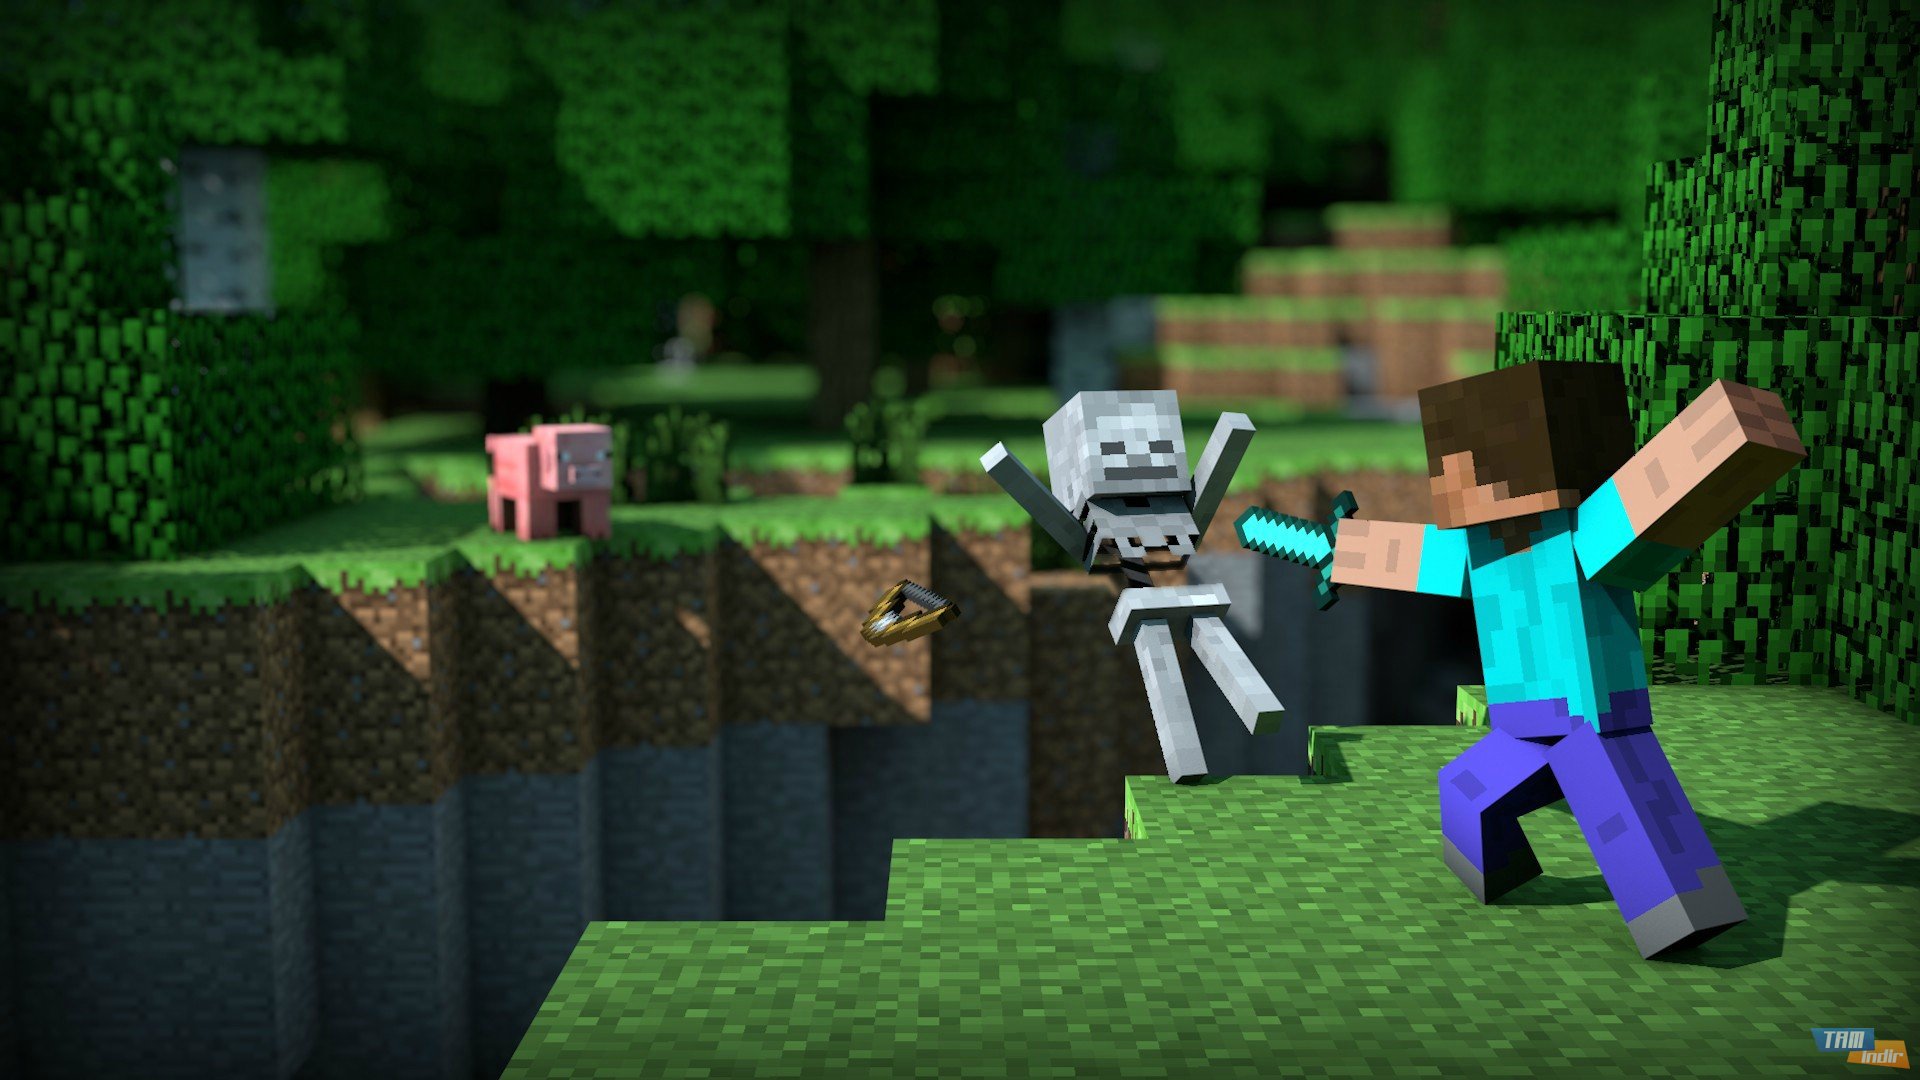 awesome minecraft hd desktop wallpapers 1080p backgrounds 1920x1080